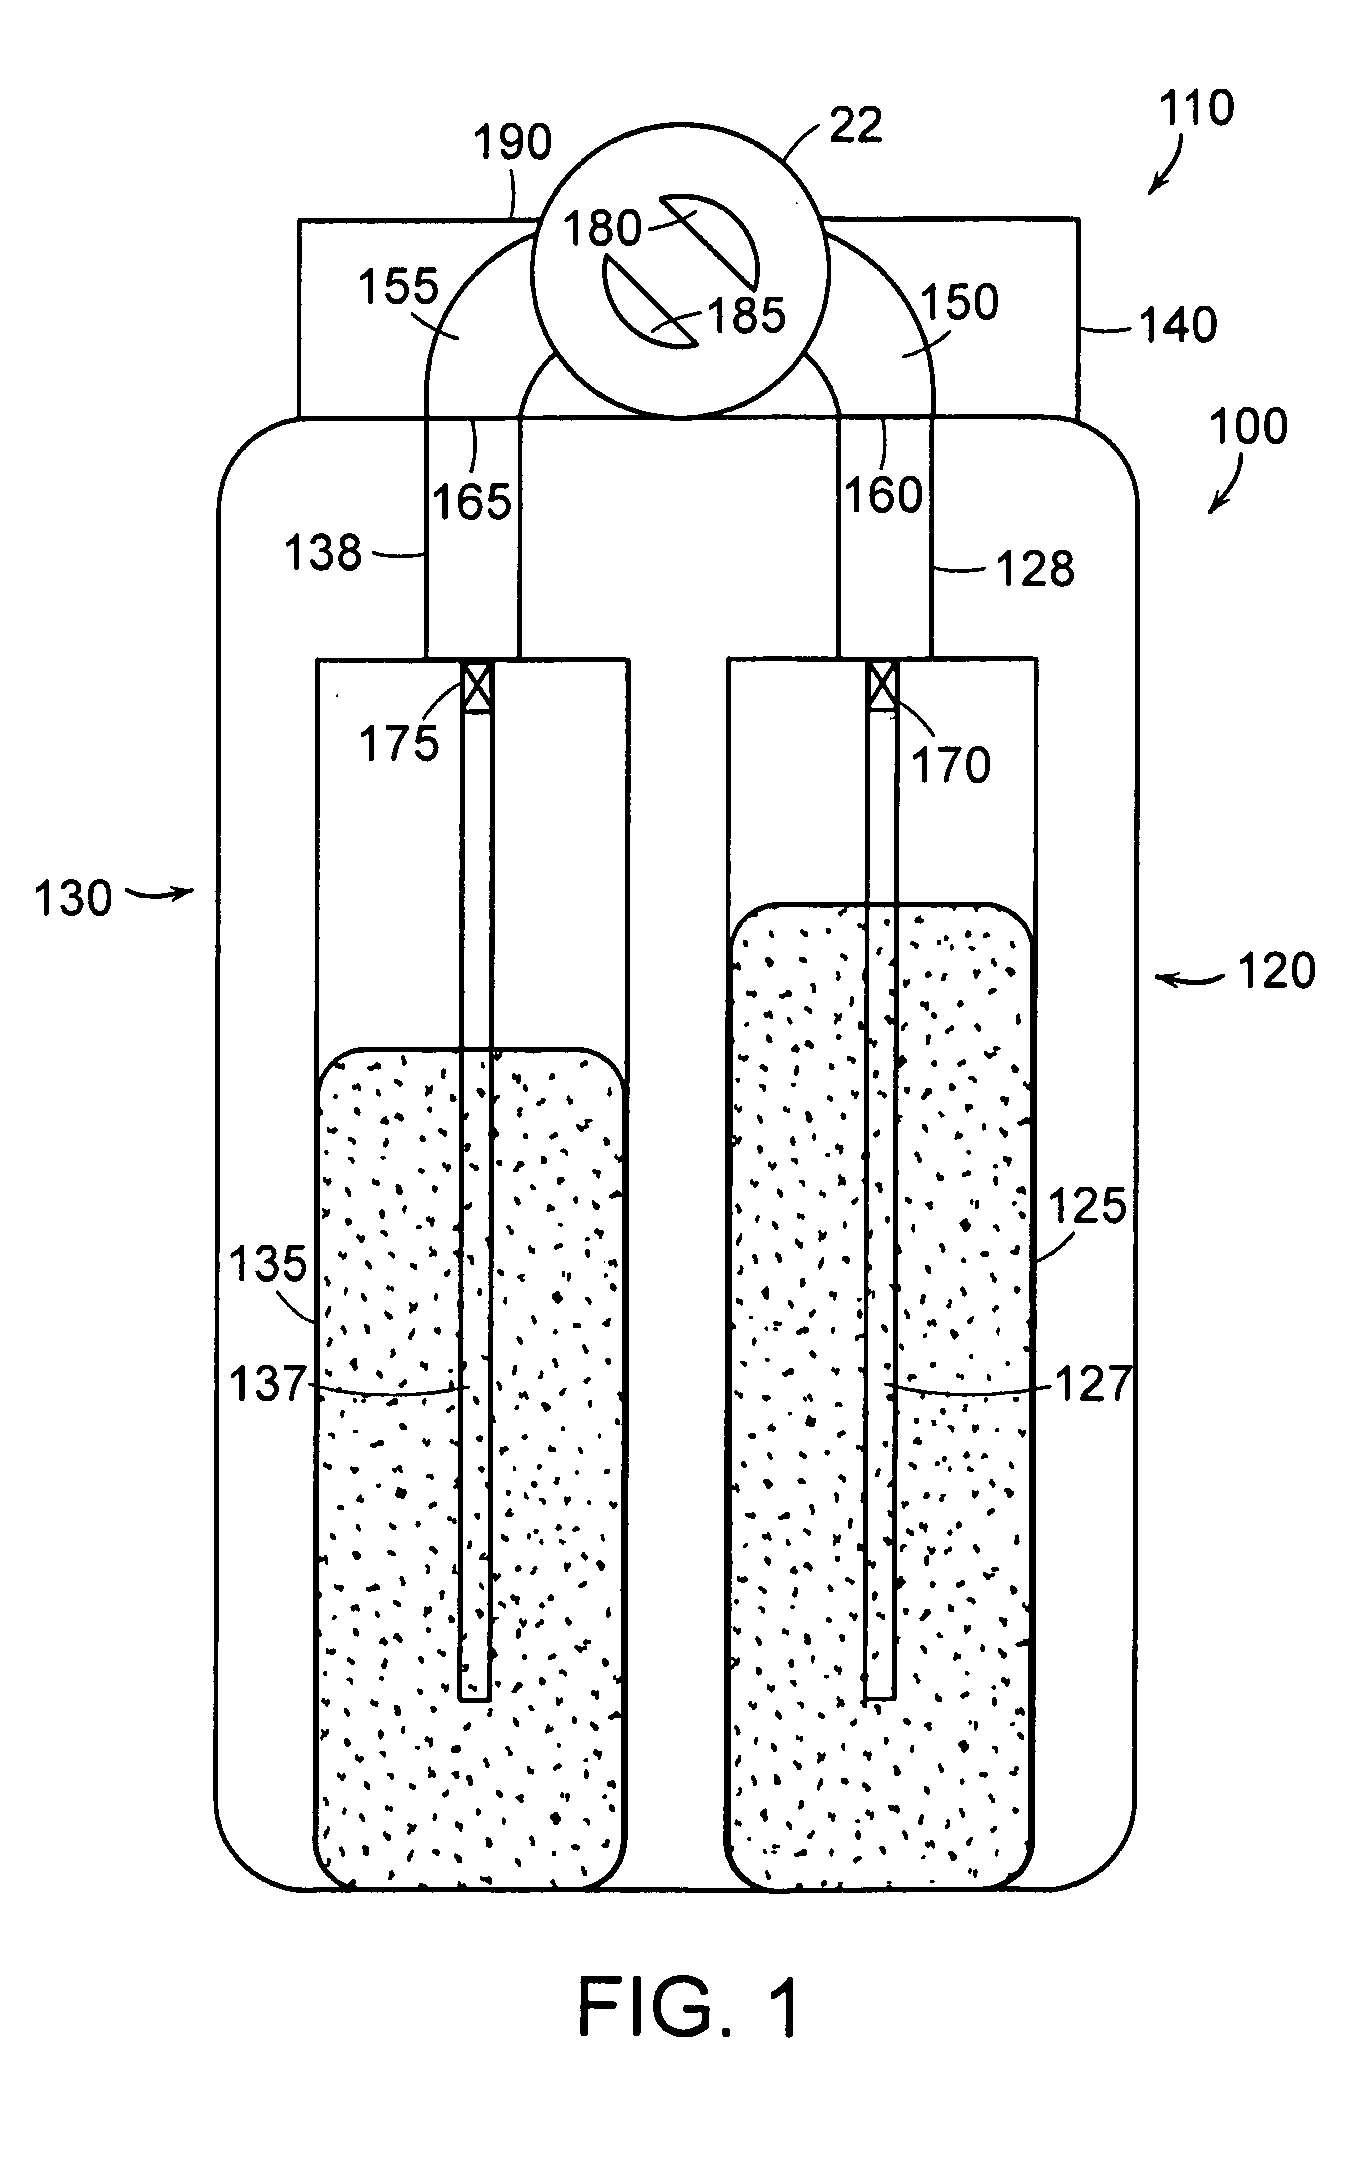 Apparatus and method for releasing a measure of content from a plurality of containers